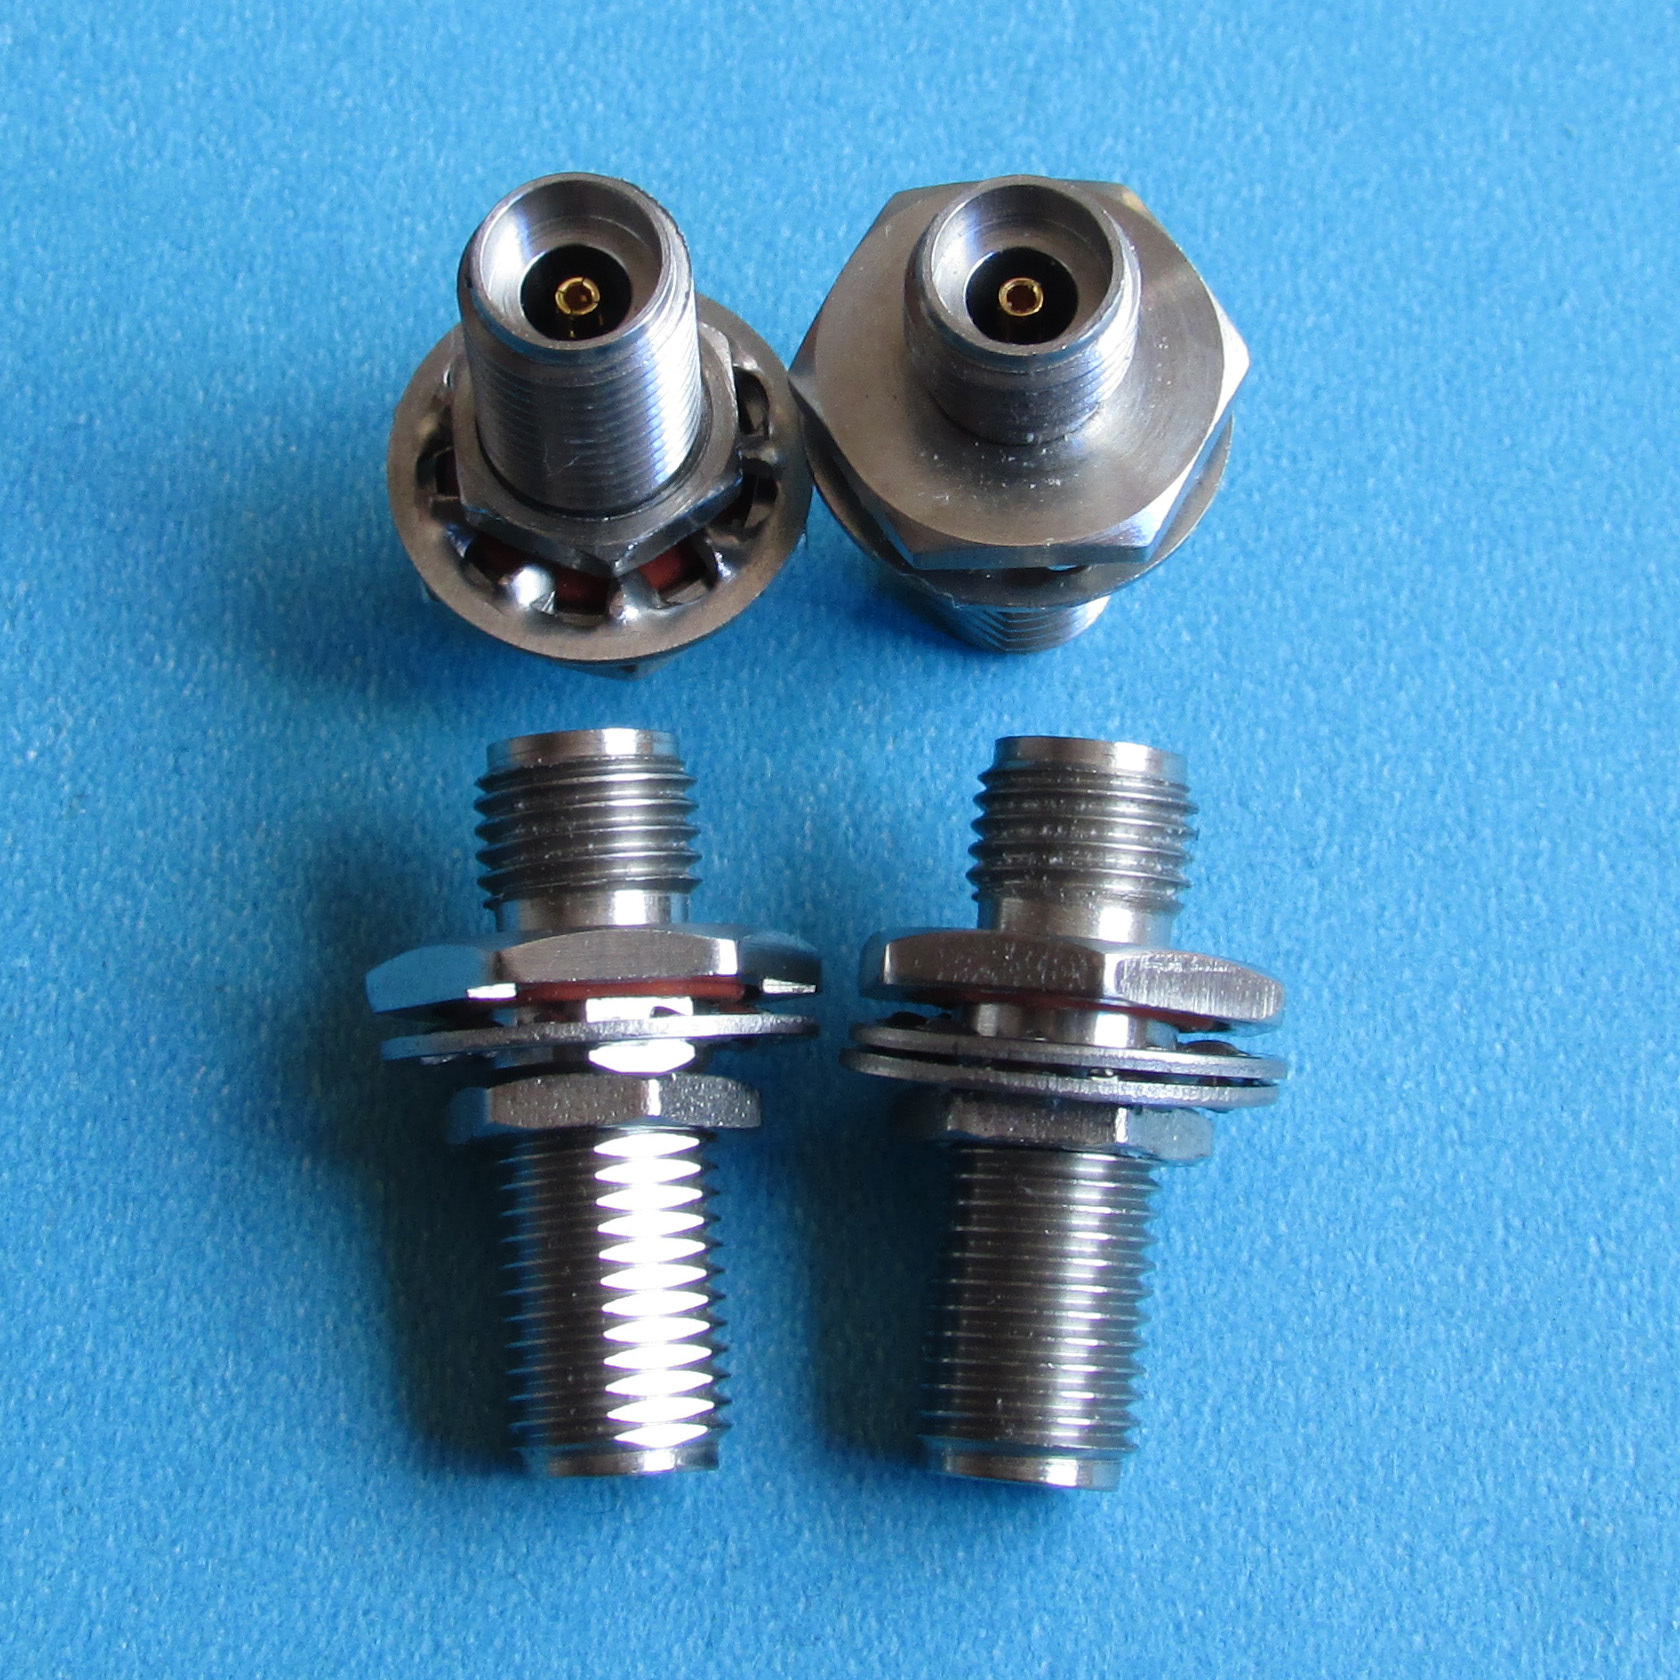 Imported instrument disassembly 40GHz 2.92mm female / 2.92mm female precision converter